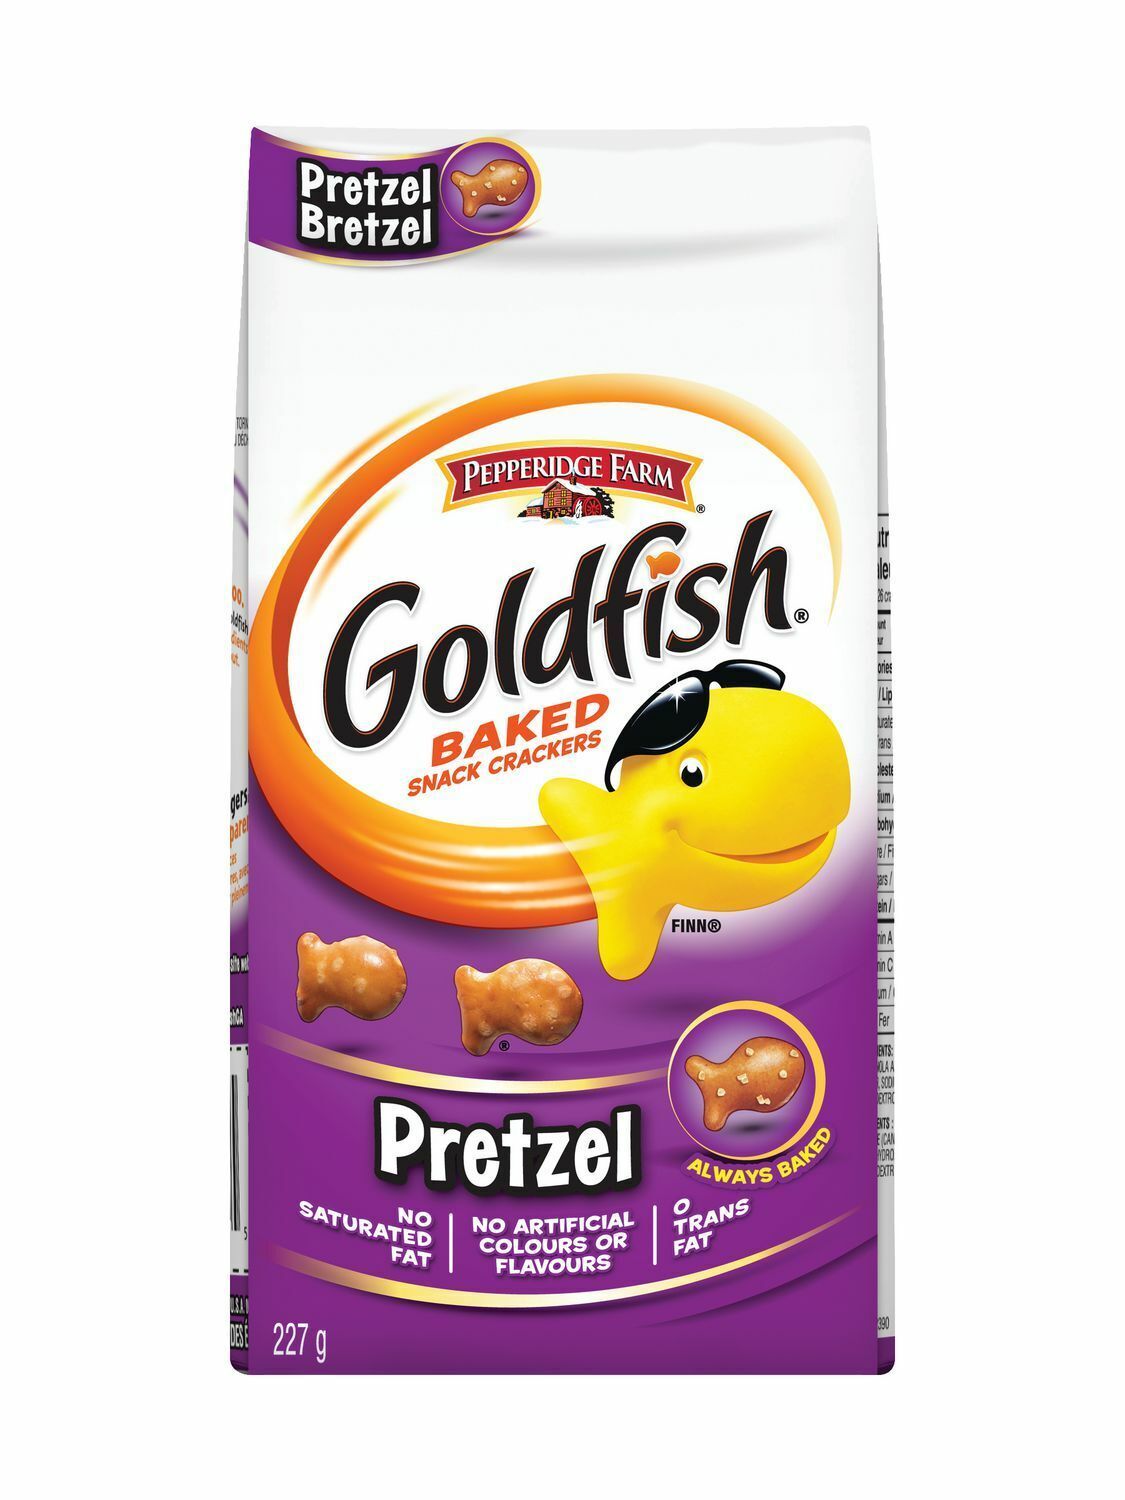 3 bags Goldfish Baked Pretzels Crackers 227g Each, From Canada, Free Shipping - $27.09